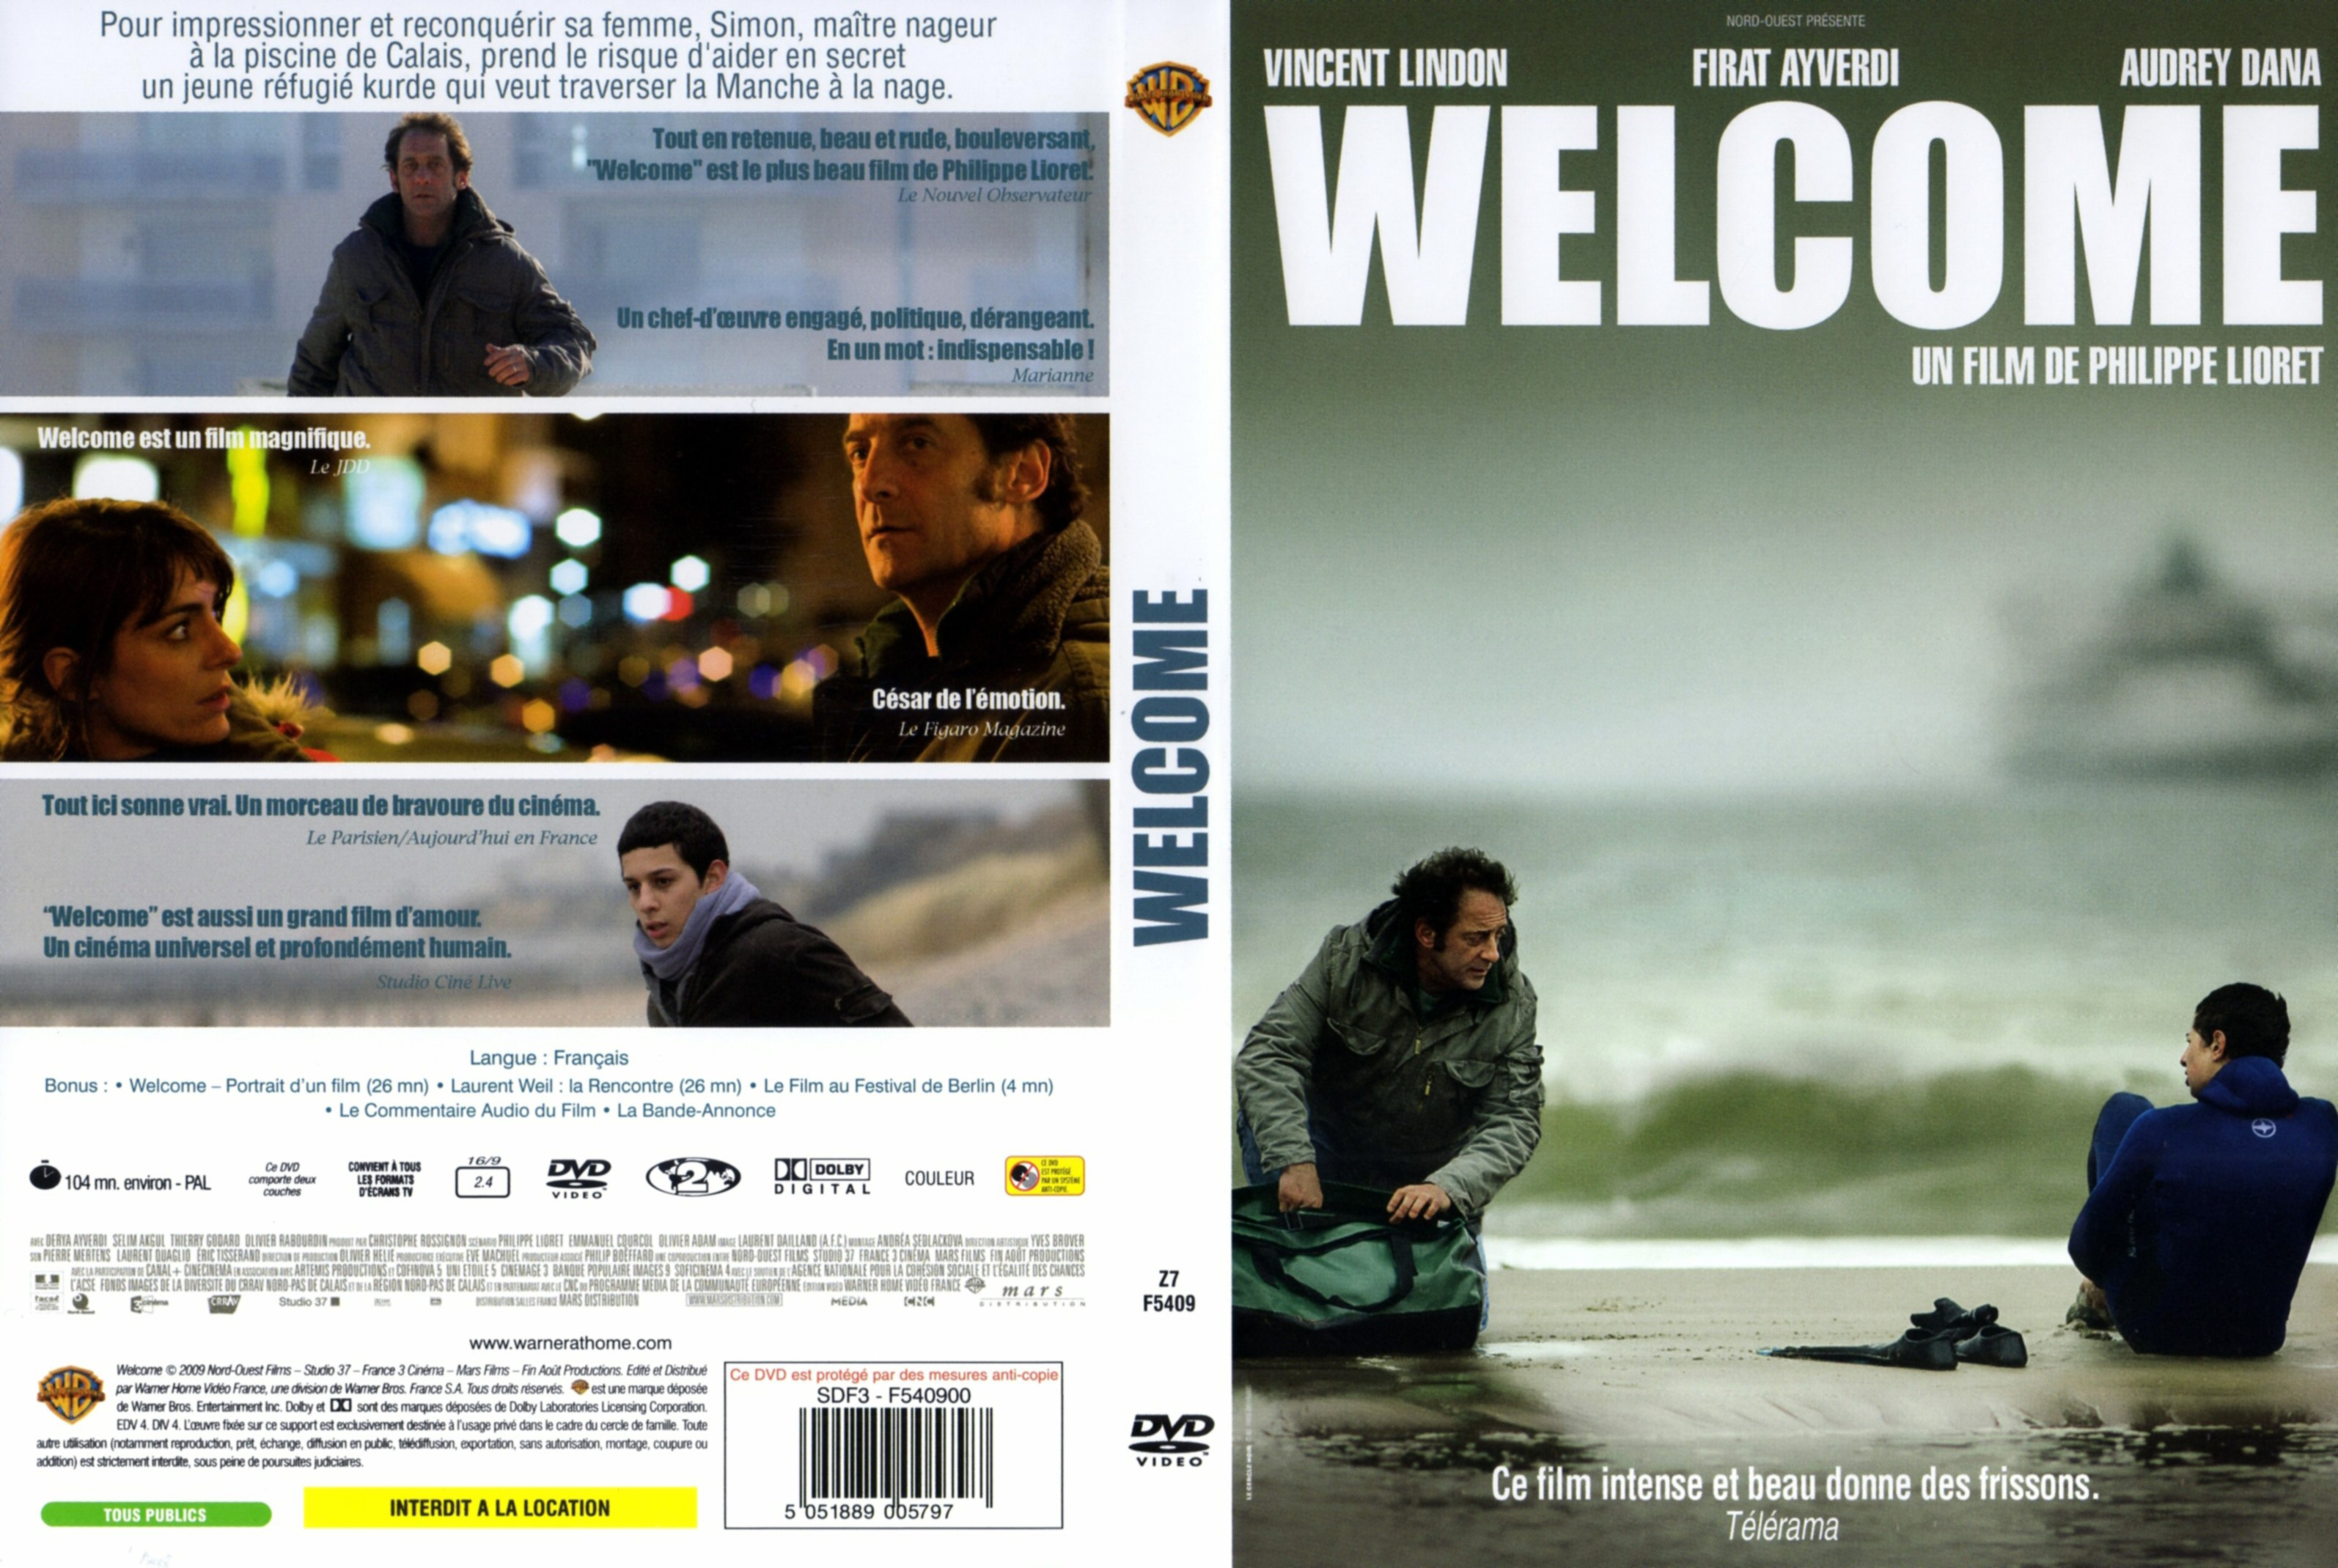 Jaquette DVD Welcome